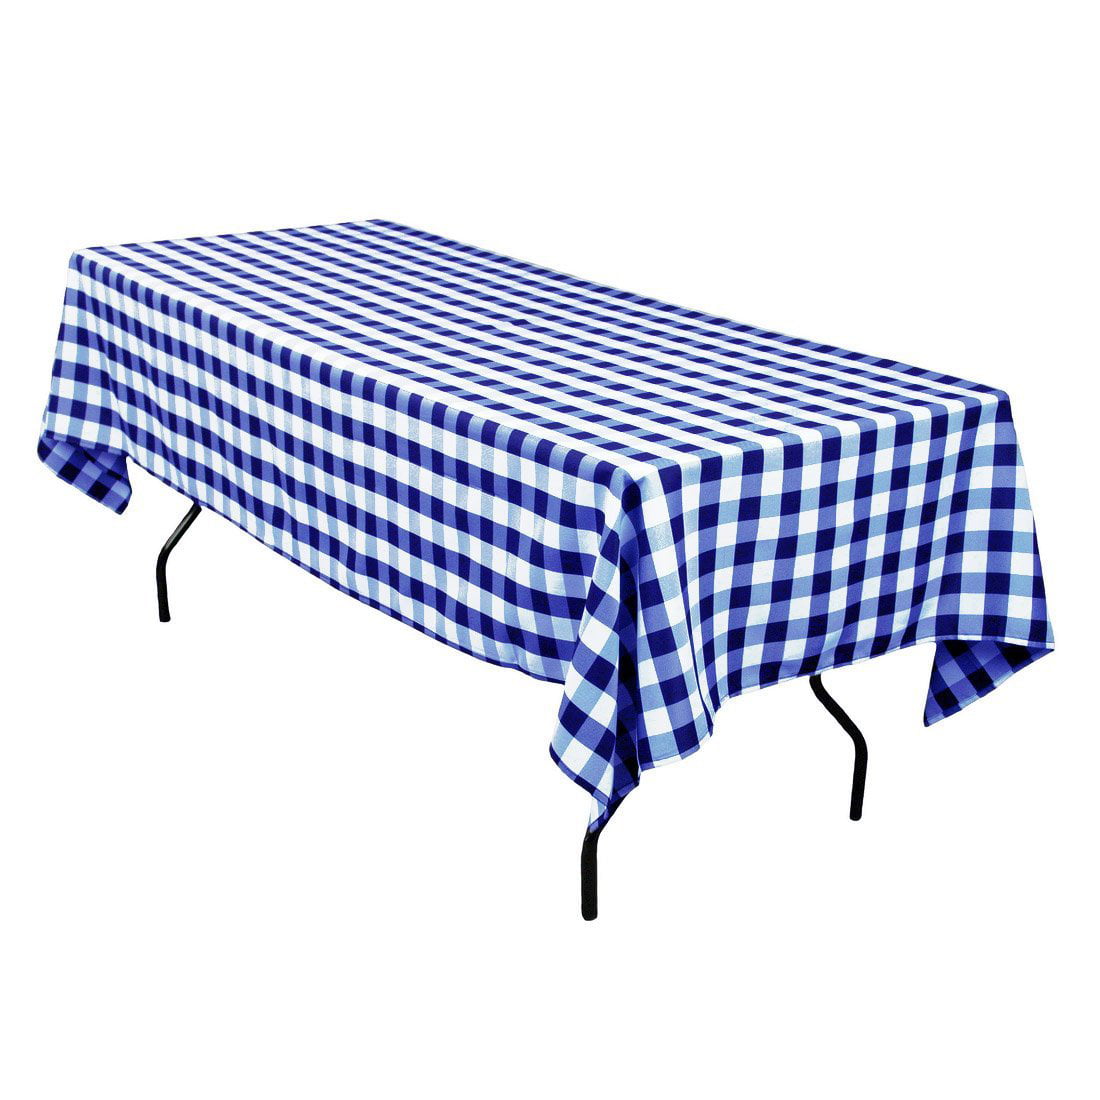 ROYAL BLUE AND WHITE CHECKERED TABLECLOTH 60" x 102" CHECKER TABLECLOTHS 